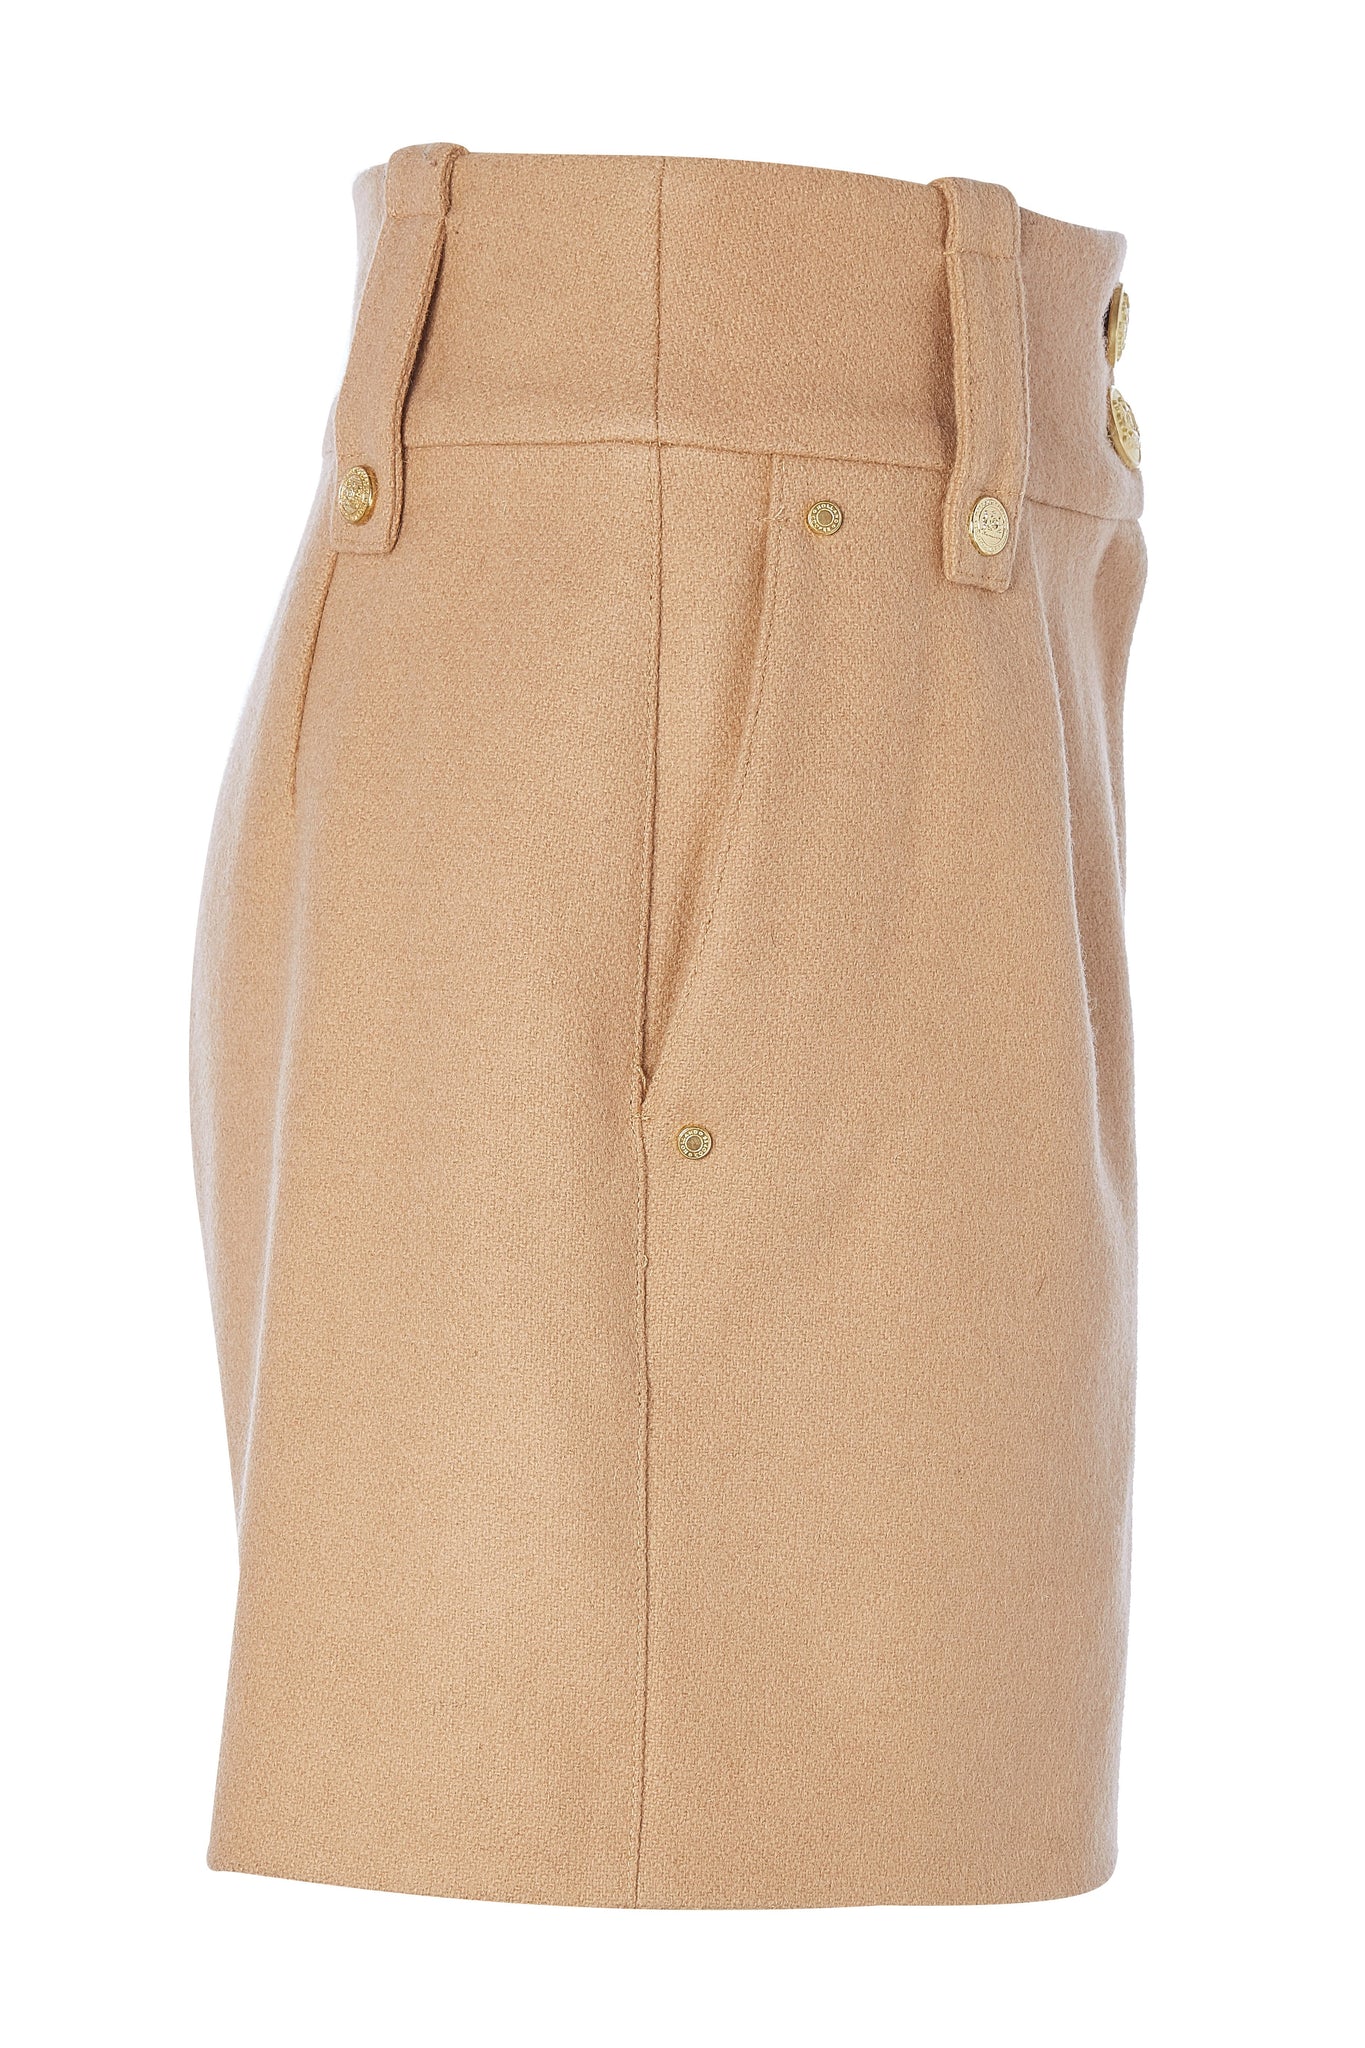 side of womens camel high rise tailored shorts with two single knife pleats and centre front zip fly fastening with twin branded gold stud buttons and side hip pockets with branded rivet detailing at top and bottom of pockets